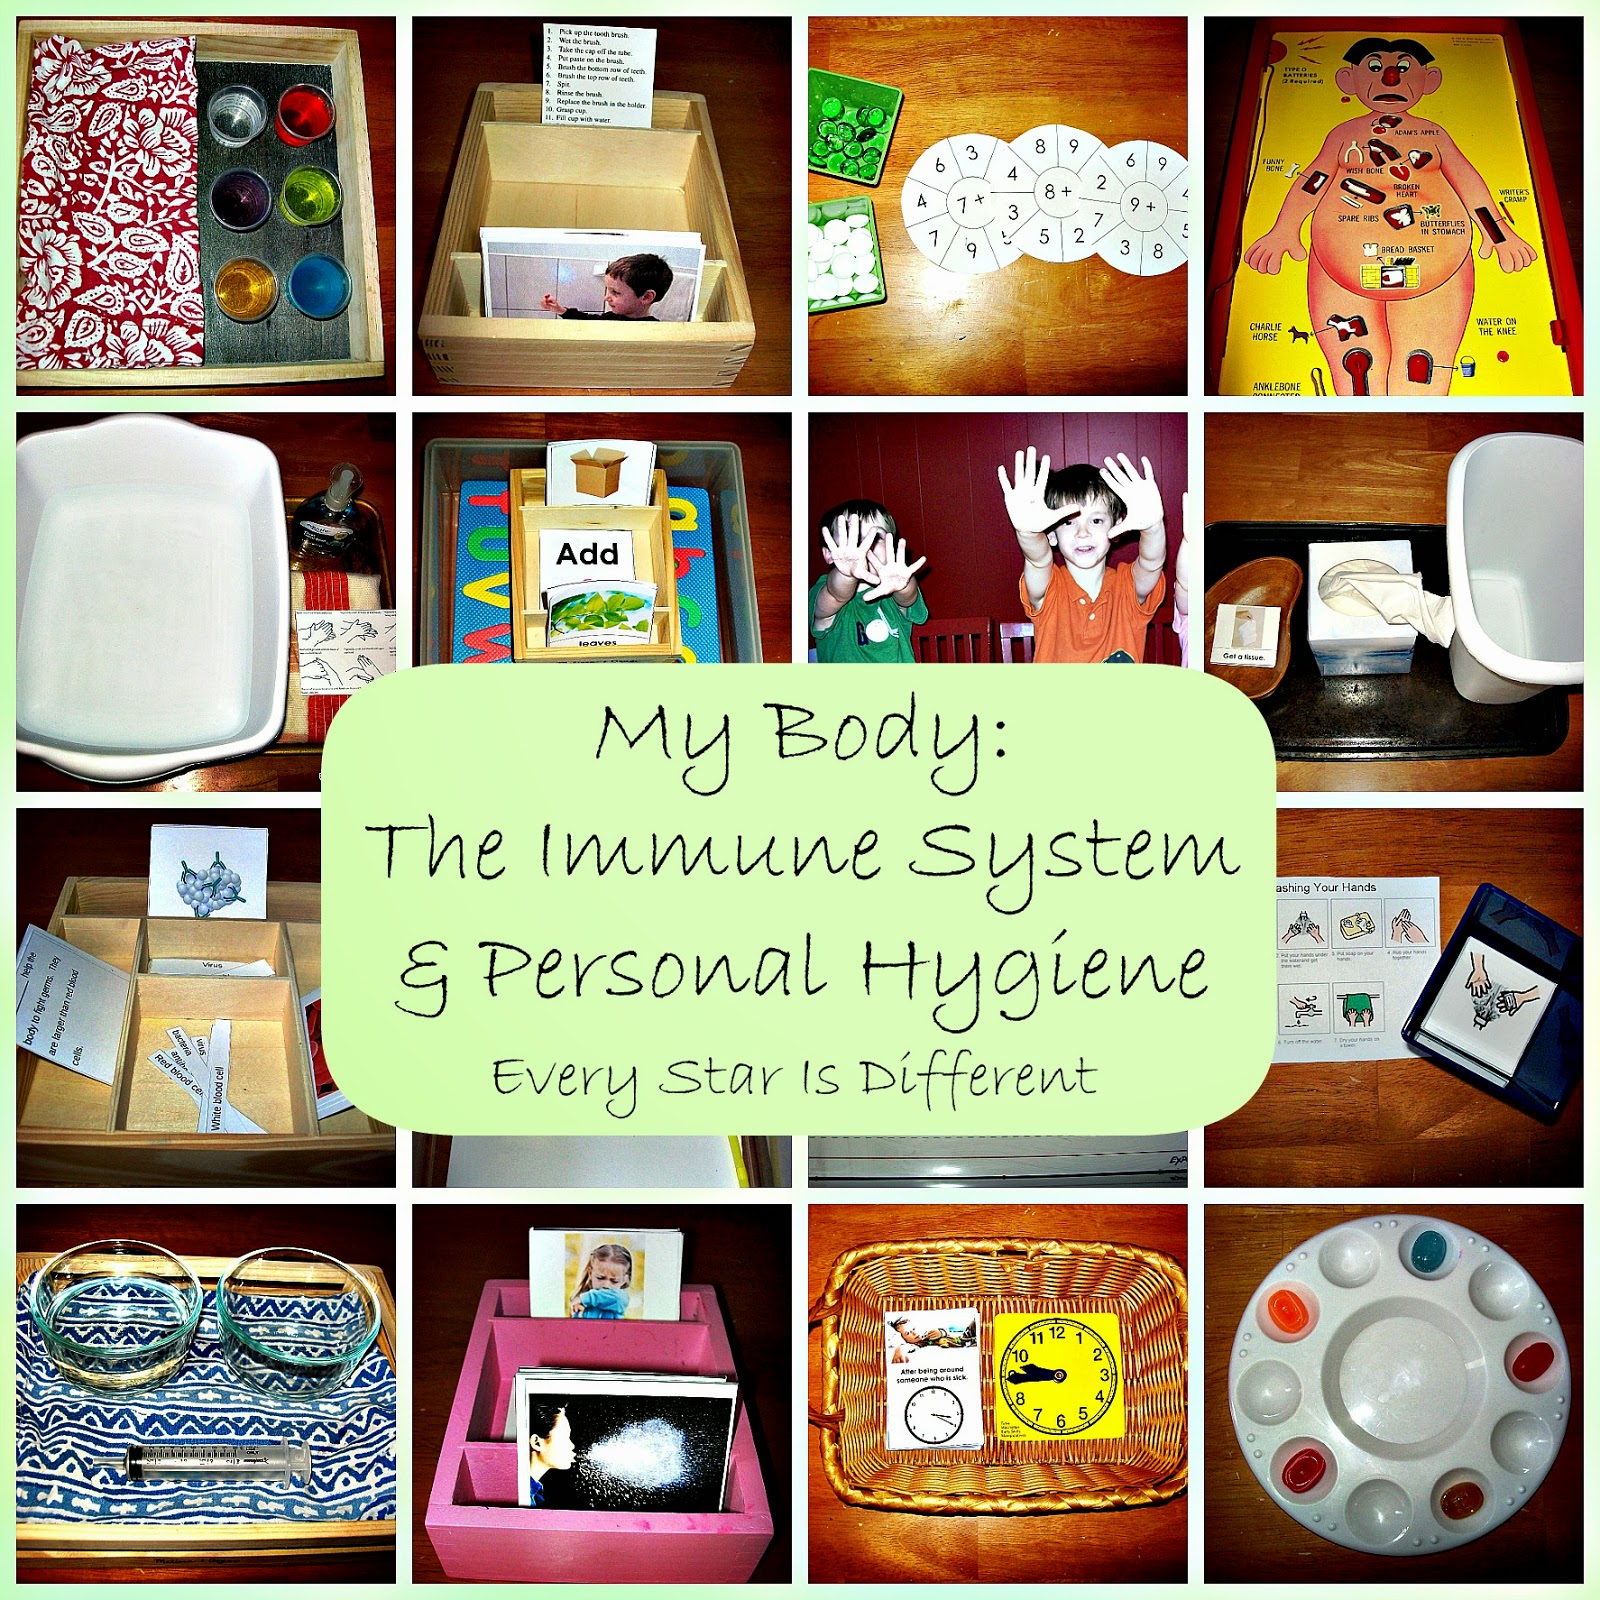 The Body: The Immune System and Personal Hygiene